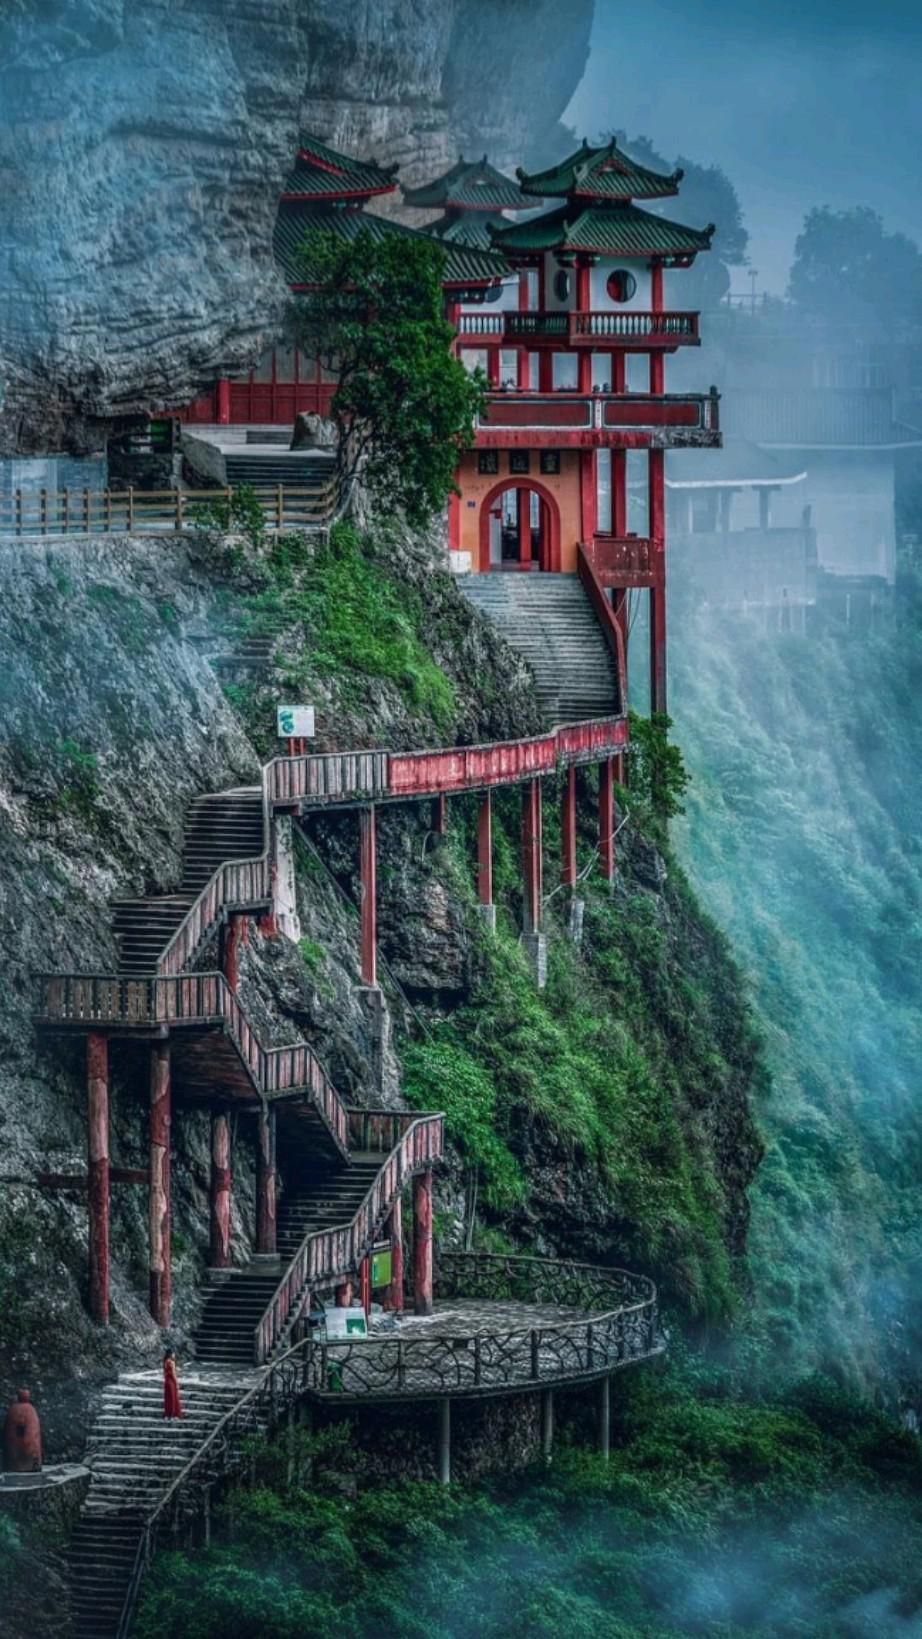 Ganluyan Temple - The Temple Built In The Mountains Of China